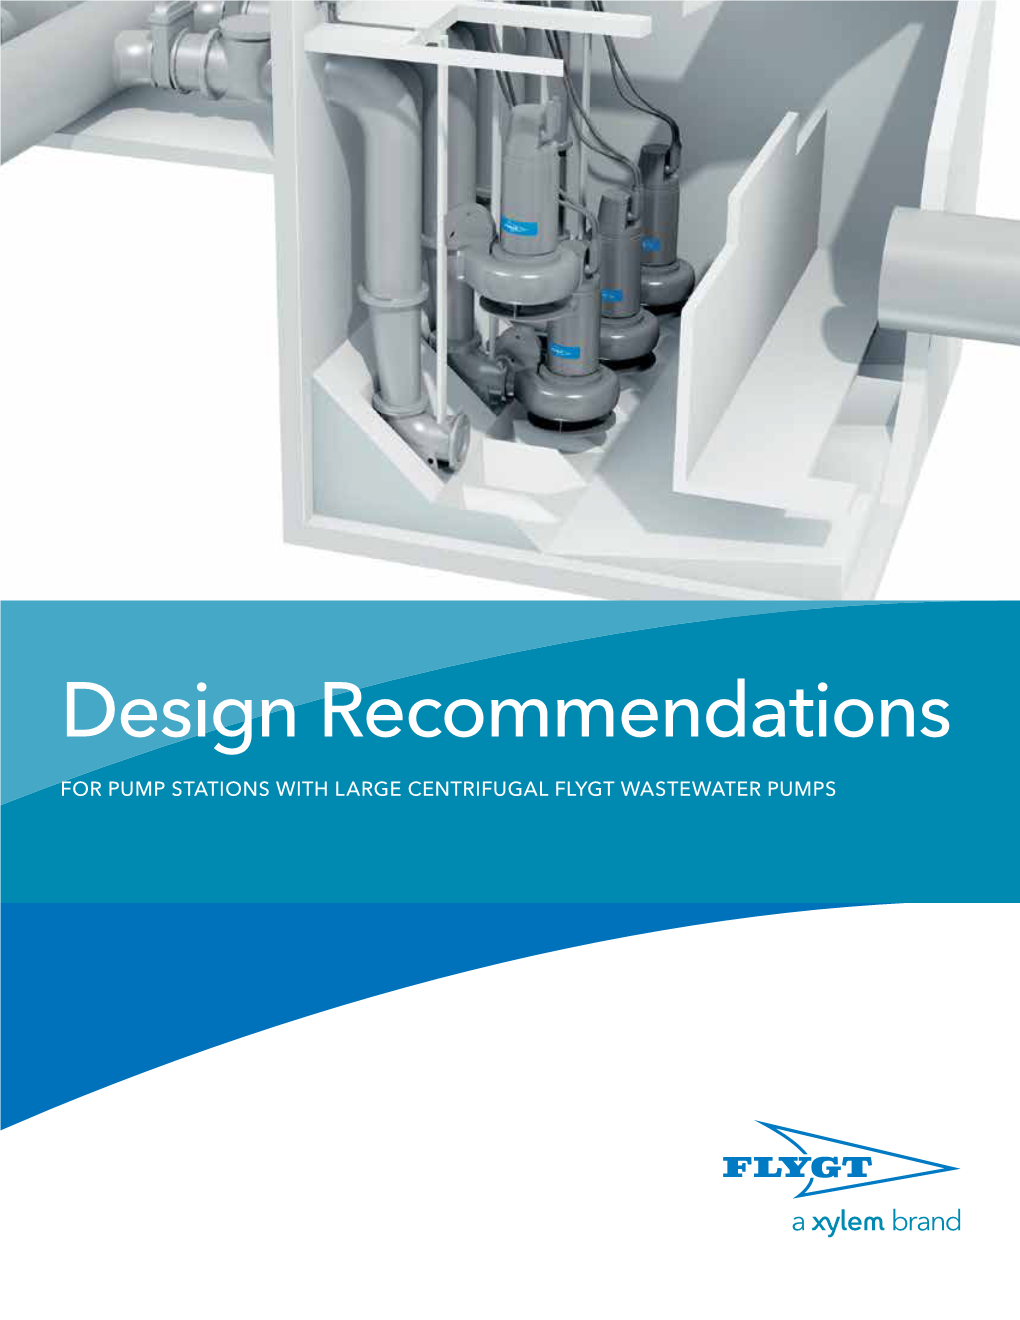 Design Recommendations for Pump Stations with Large Centrifugal Flygt Wastewater Pumps Brochure